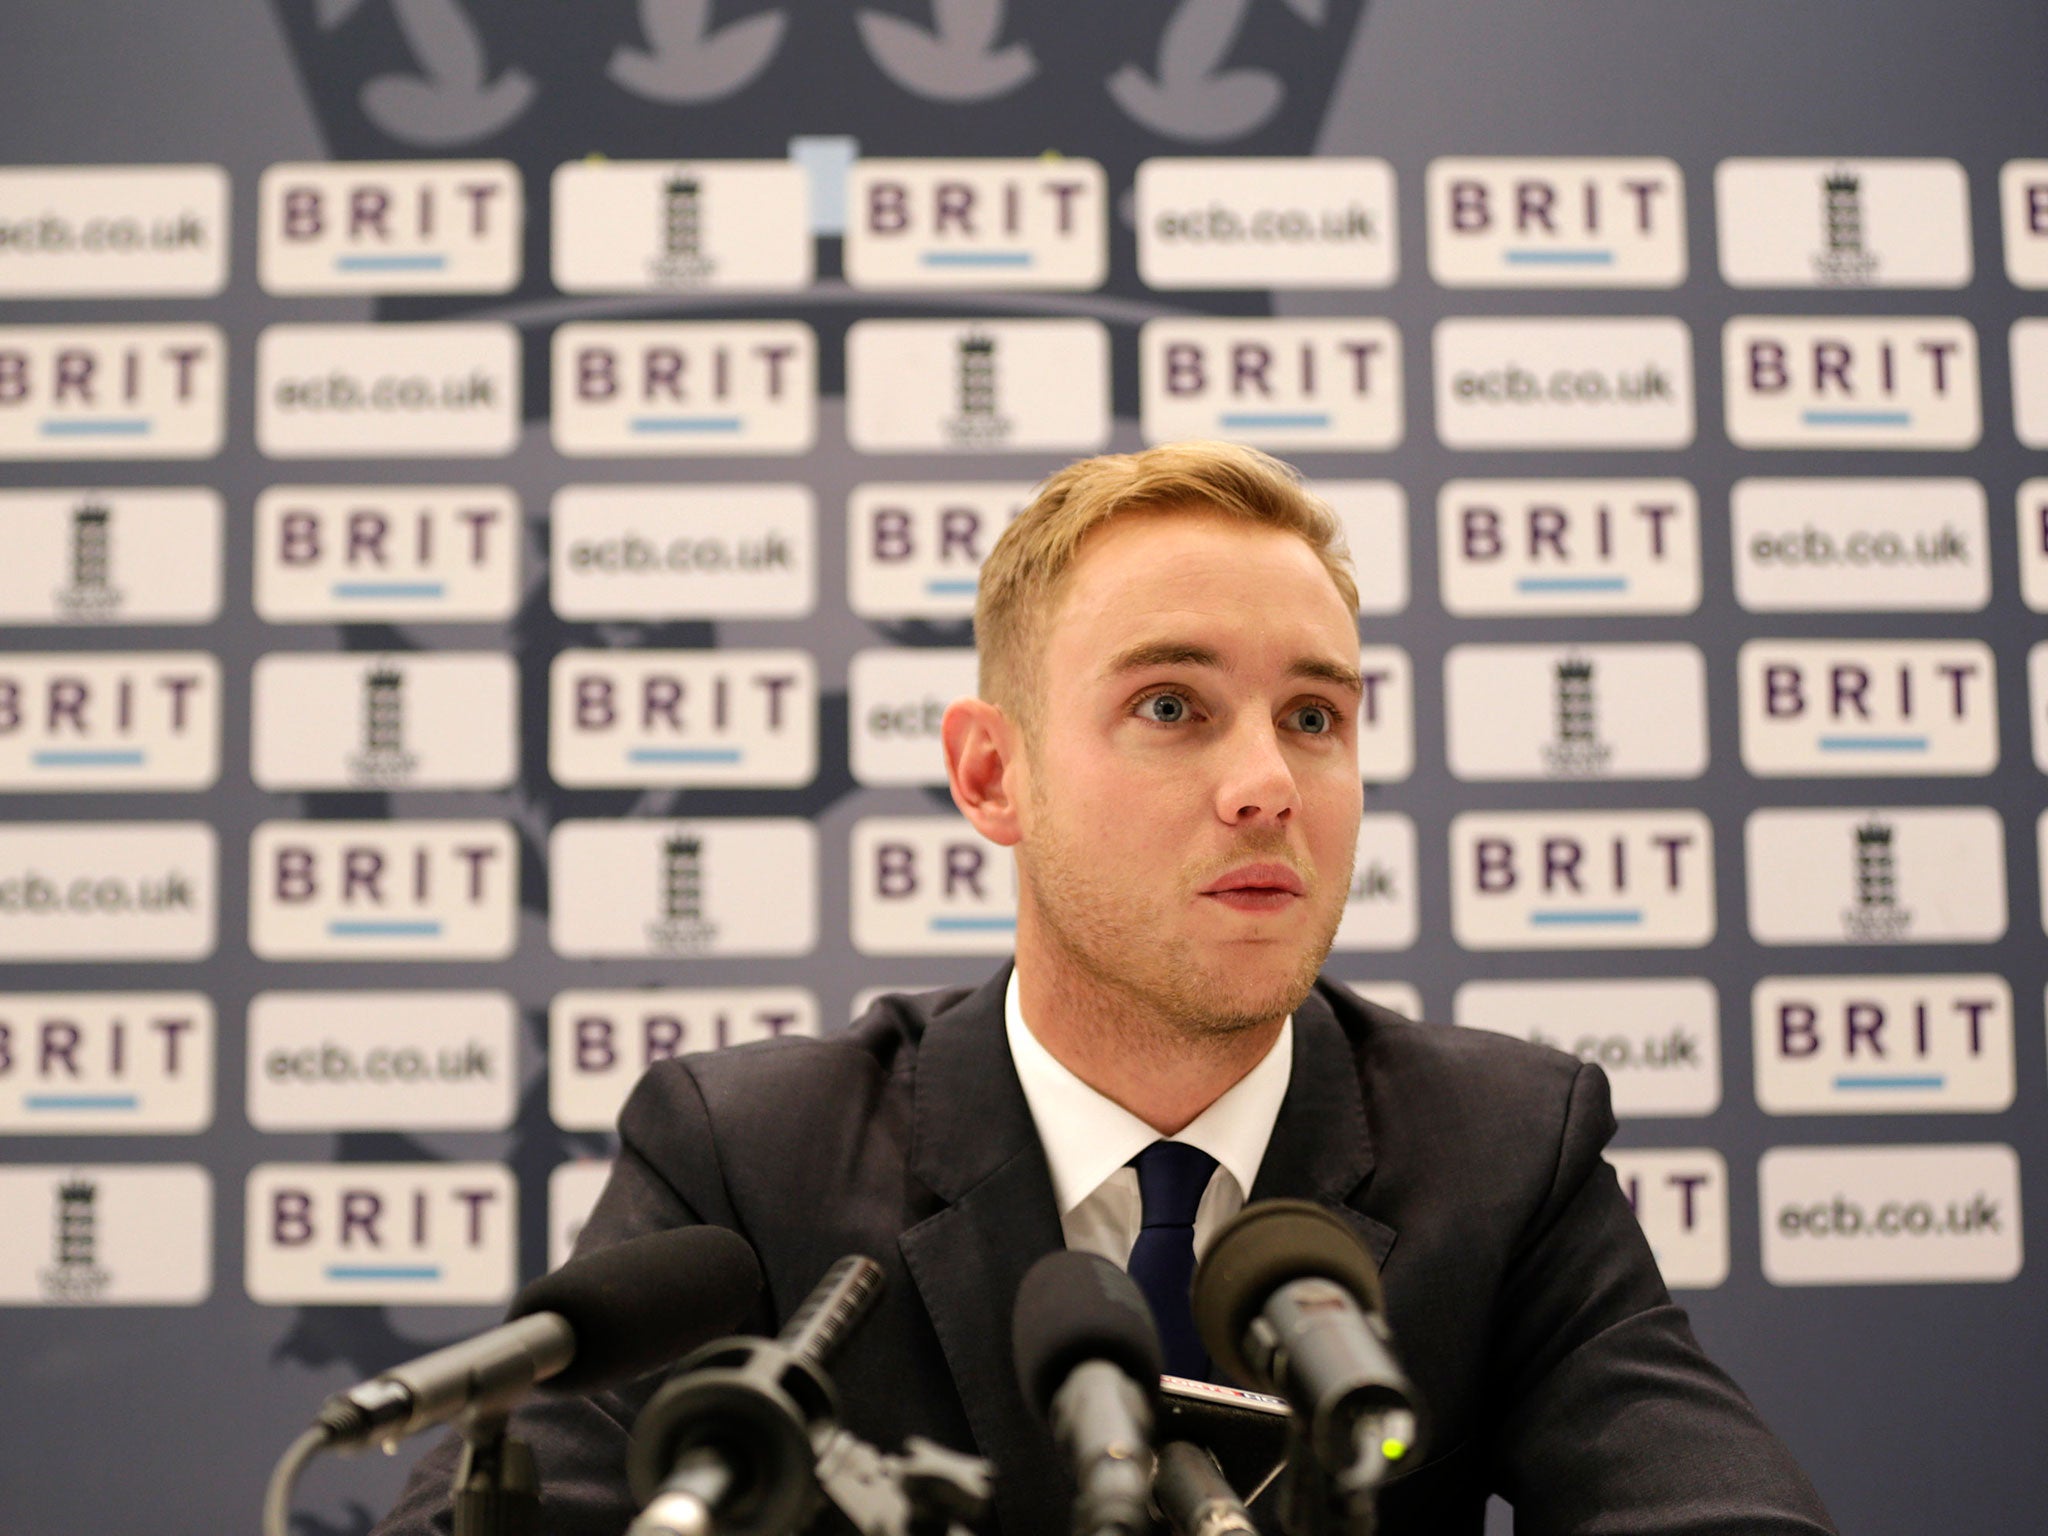 Stuart Broad has revealed that he was not 'deeply involved' in the decision to axe Kevin Pietersen from the England cricket team